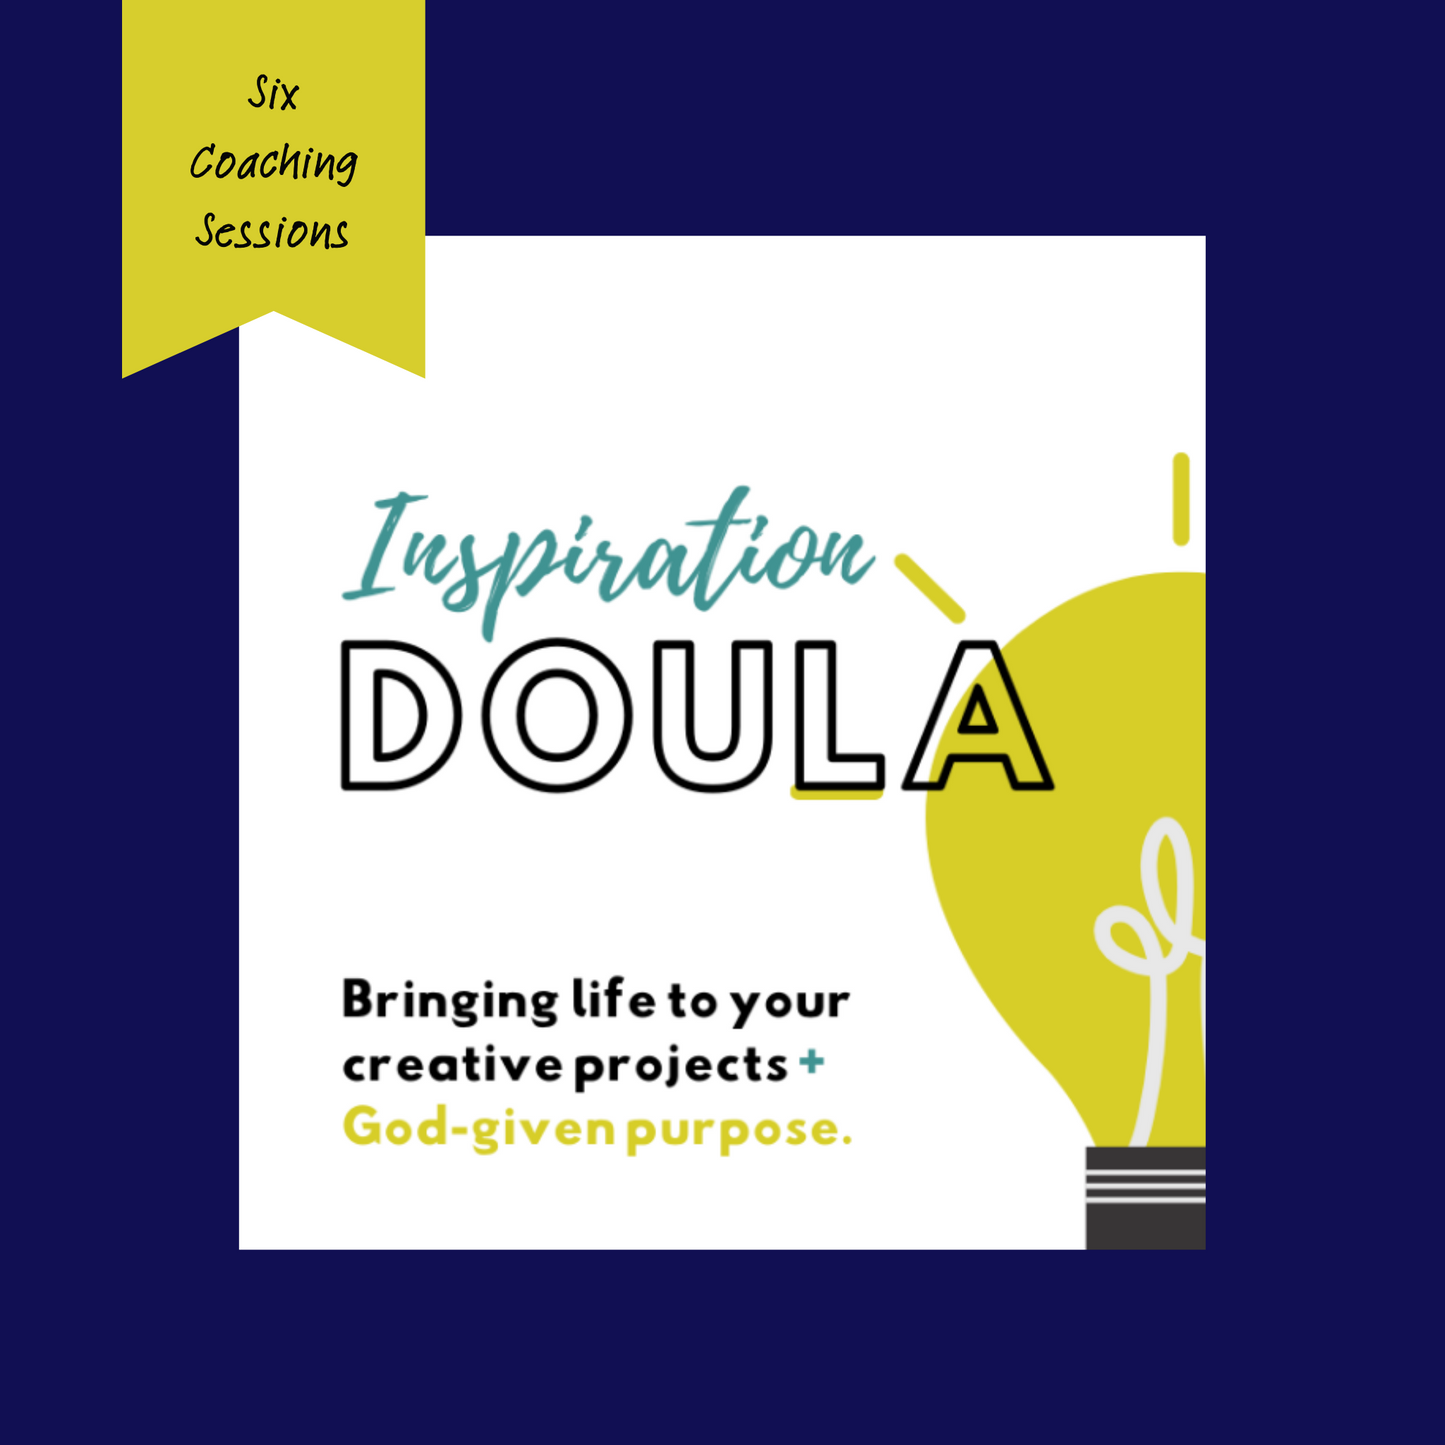 Inspiration Doula Coaching (6 Sessions)